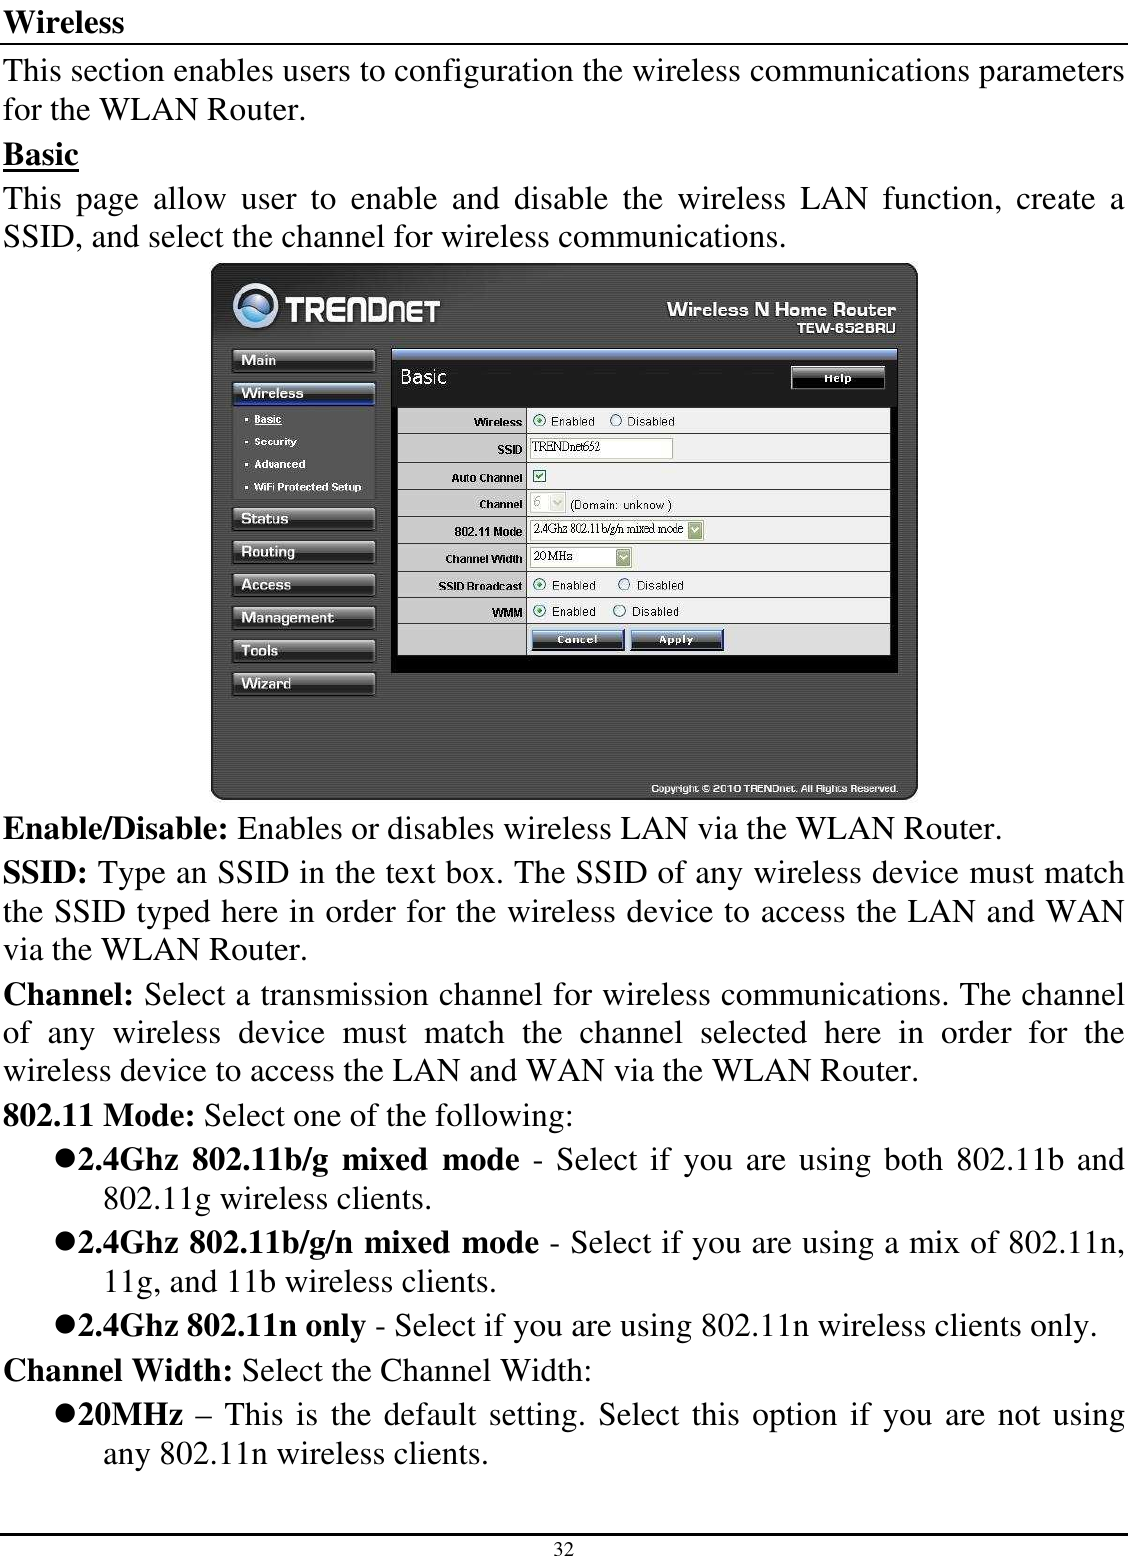 32 Wireless This section enables users to configuration the wireless communications parameters for the WLAN Router. Basic This  page  allow  user  to  enable  and  disable  the  wireless  LAN  function,  create  a SSID, and select the channel for wireless communications.  Enable/Disable: Enables or disables wireless LAN via the WLAN Router. SSID: Type an SSID in the text box. The SSID of any wireless device must match the SSID typed here in order for the wireless device to access the LAN and WAN via the WLAN Router. Channel: Select a transmission channel for wireless communications. The channel of  any  wireless  device  must  match  the  channel  selected  here  in  order  for  the wireless device to access the LAN and WAN via the WLAN Router. 802.11 Mode: Select one of the following: 2.4Ghz 802.11b/g  mixed  mode - Select if you are using both 802.11b and 802.11g wireless clients. 2.4Ghz 802.11b/g/n mixed mode - Select if you are using a mix of 802.11n, 11g, and 11b wireless clients. 2.4Ghz 802.11n only - Select if you are using 802.11n wireless clients only. Channel Width: Select the Channel Width: 20MHz – This is the default setting. Select this option if you are not using any 802.11n wireless clients. 